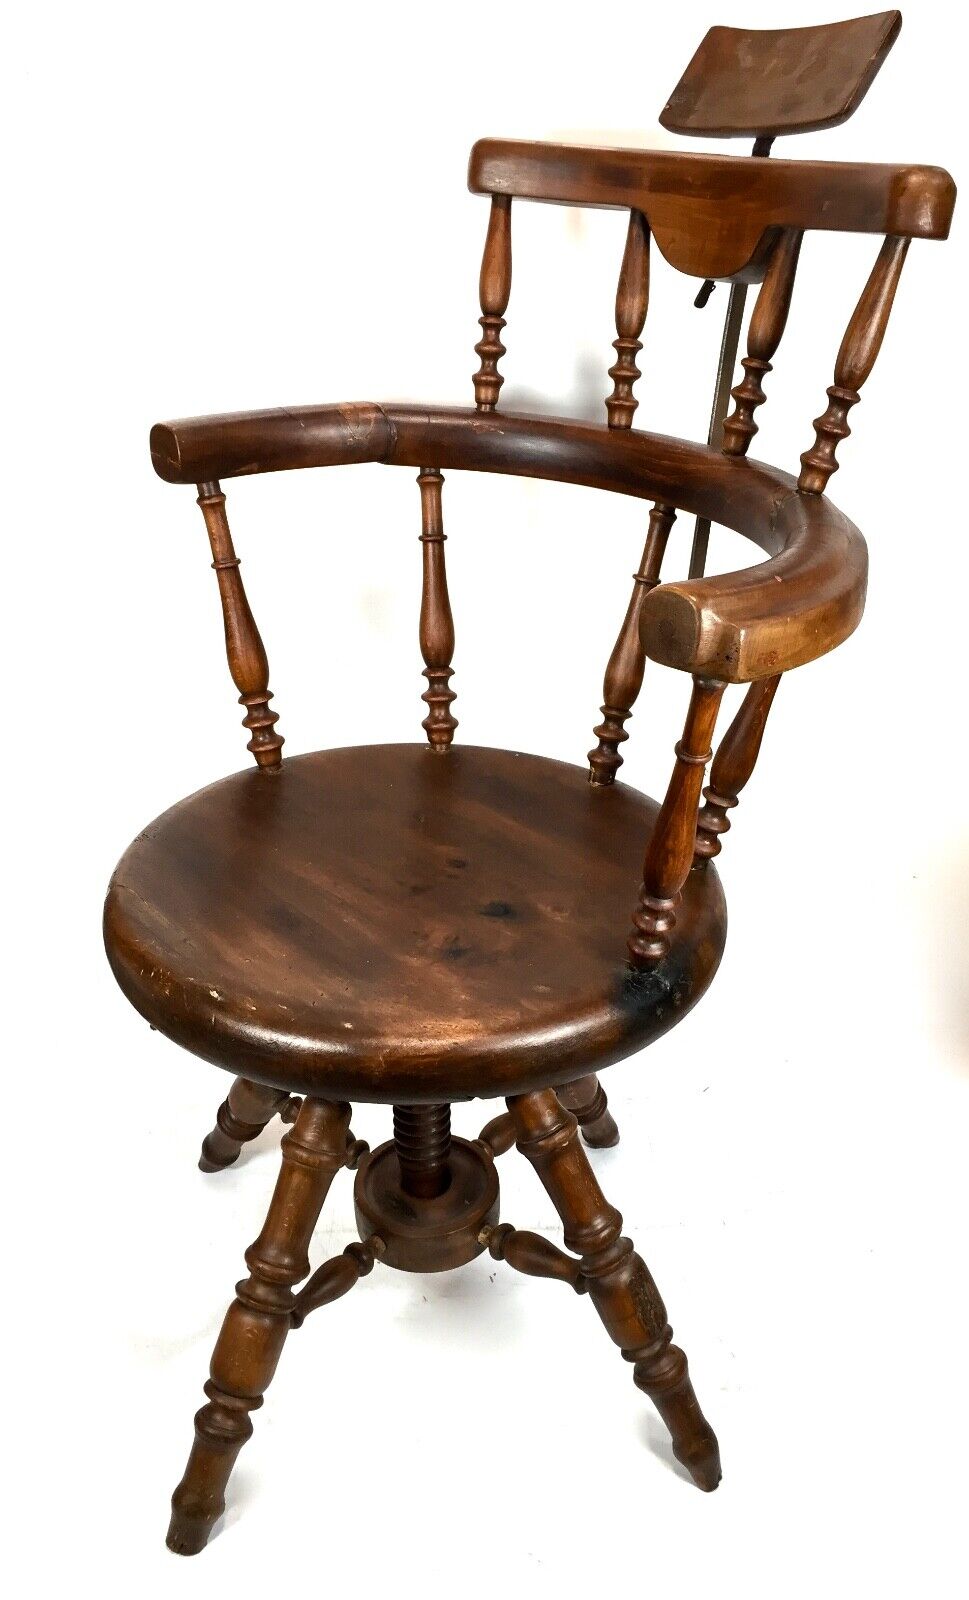 Antique Victorian Wooden Elm Rotating Barbers Chair / Shop Display Furniture